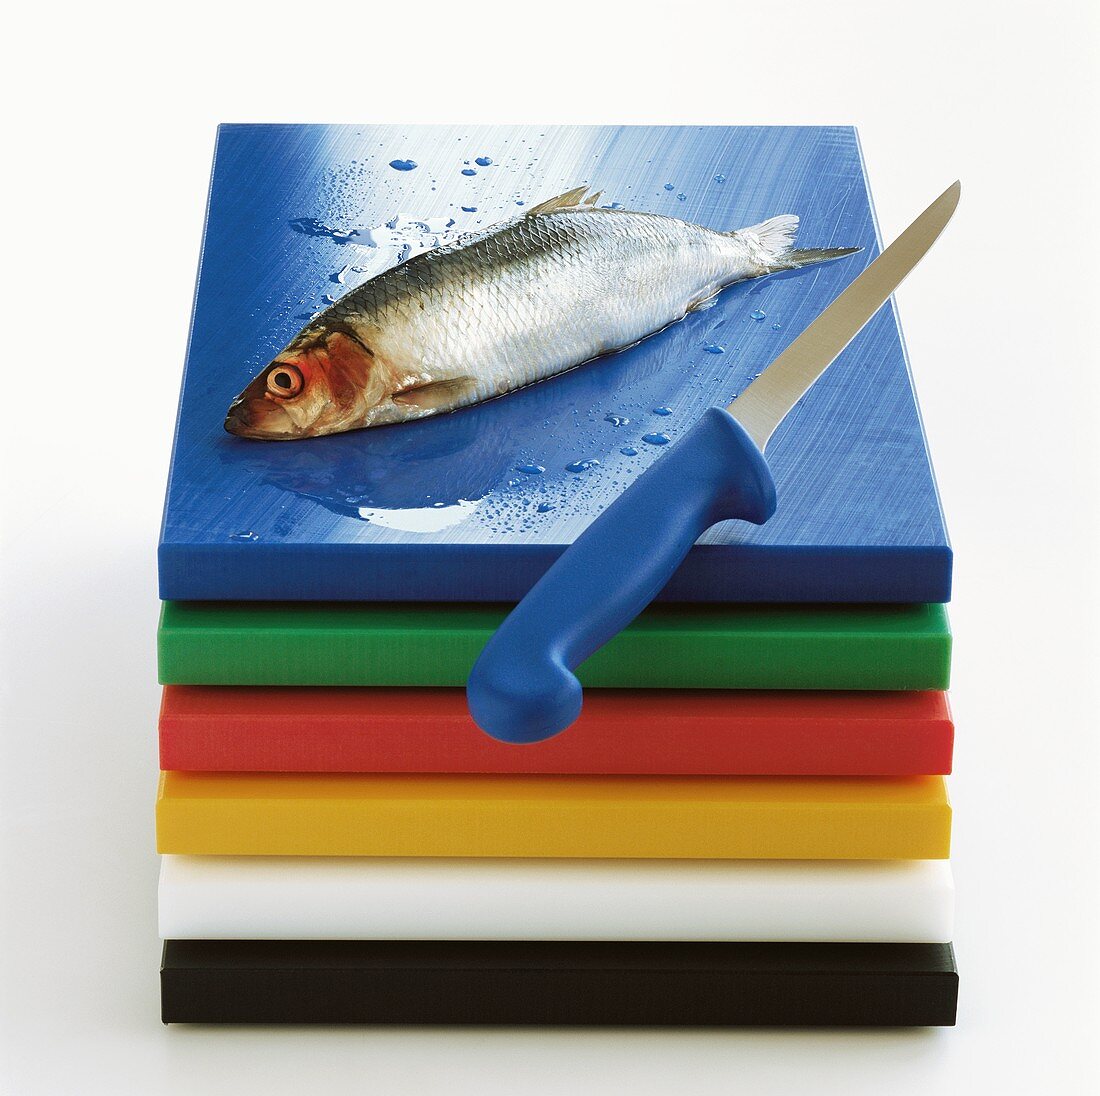 A herring with knife on blue board